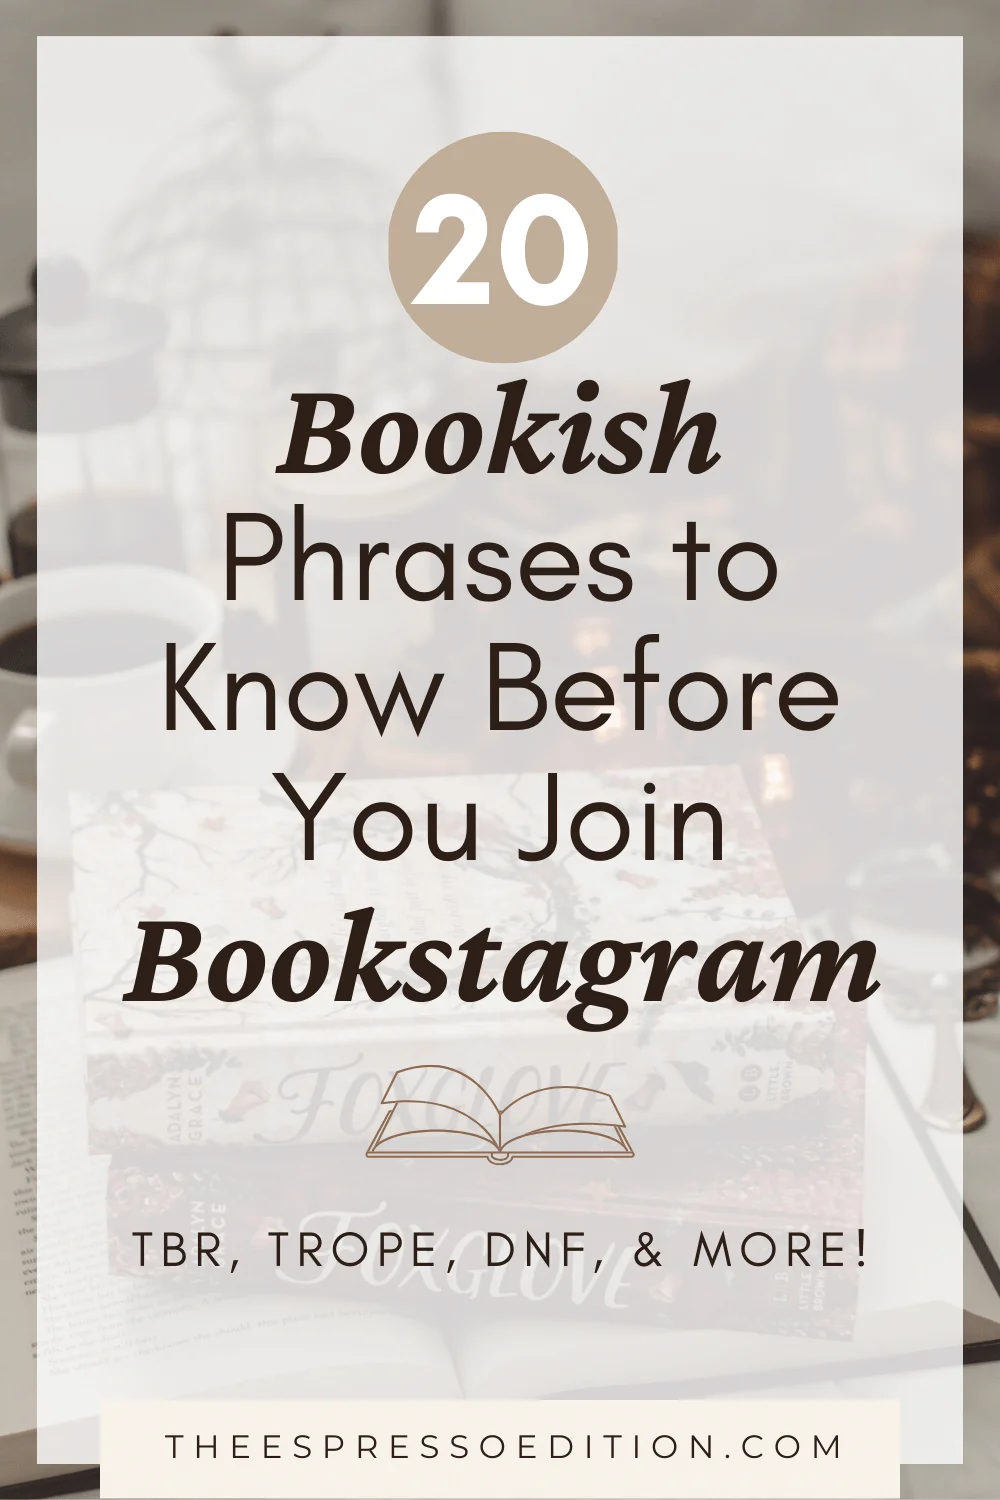  20 Bookish Phrases to Know Before You Join Bookstagram by The Espresso Edition cozy bookish blog